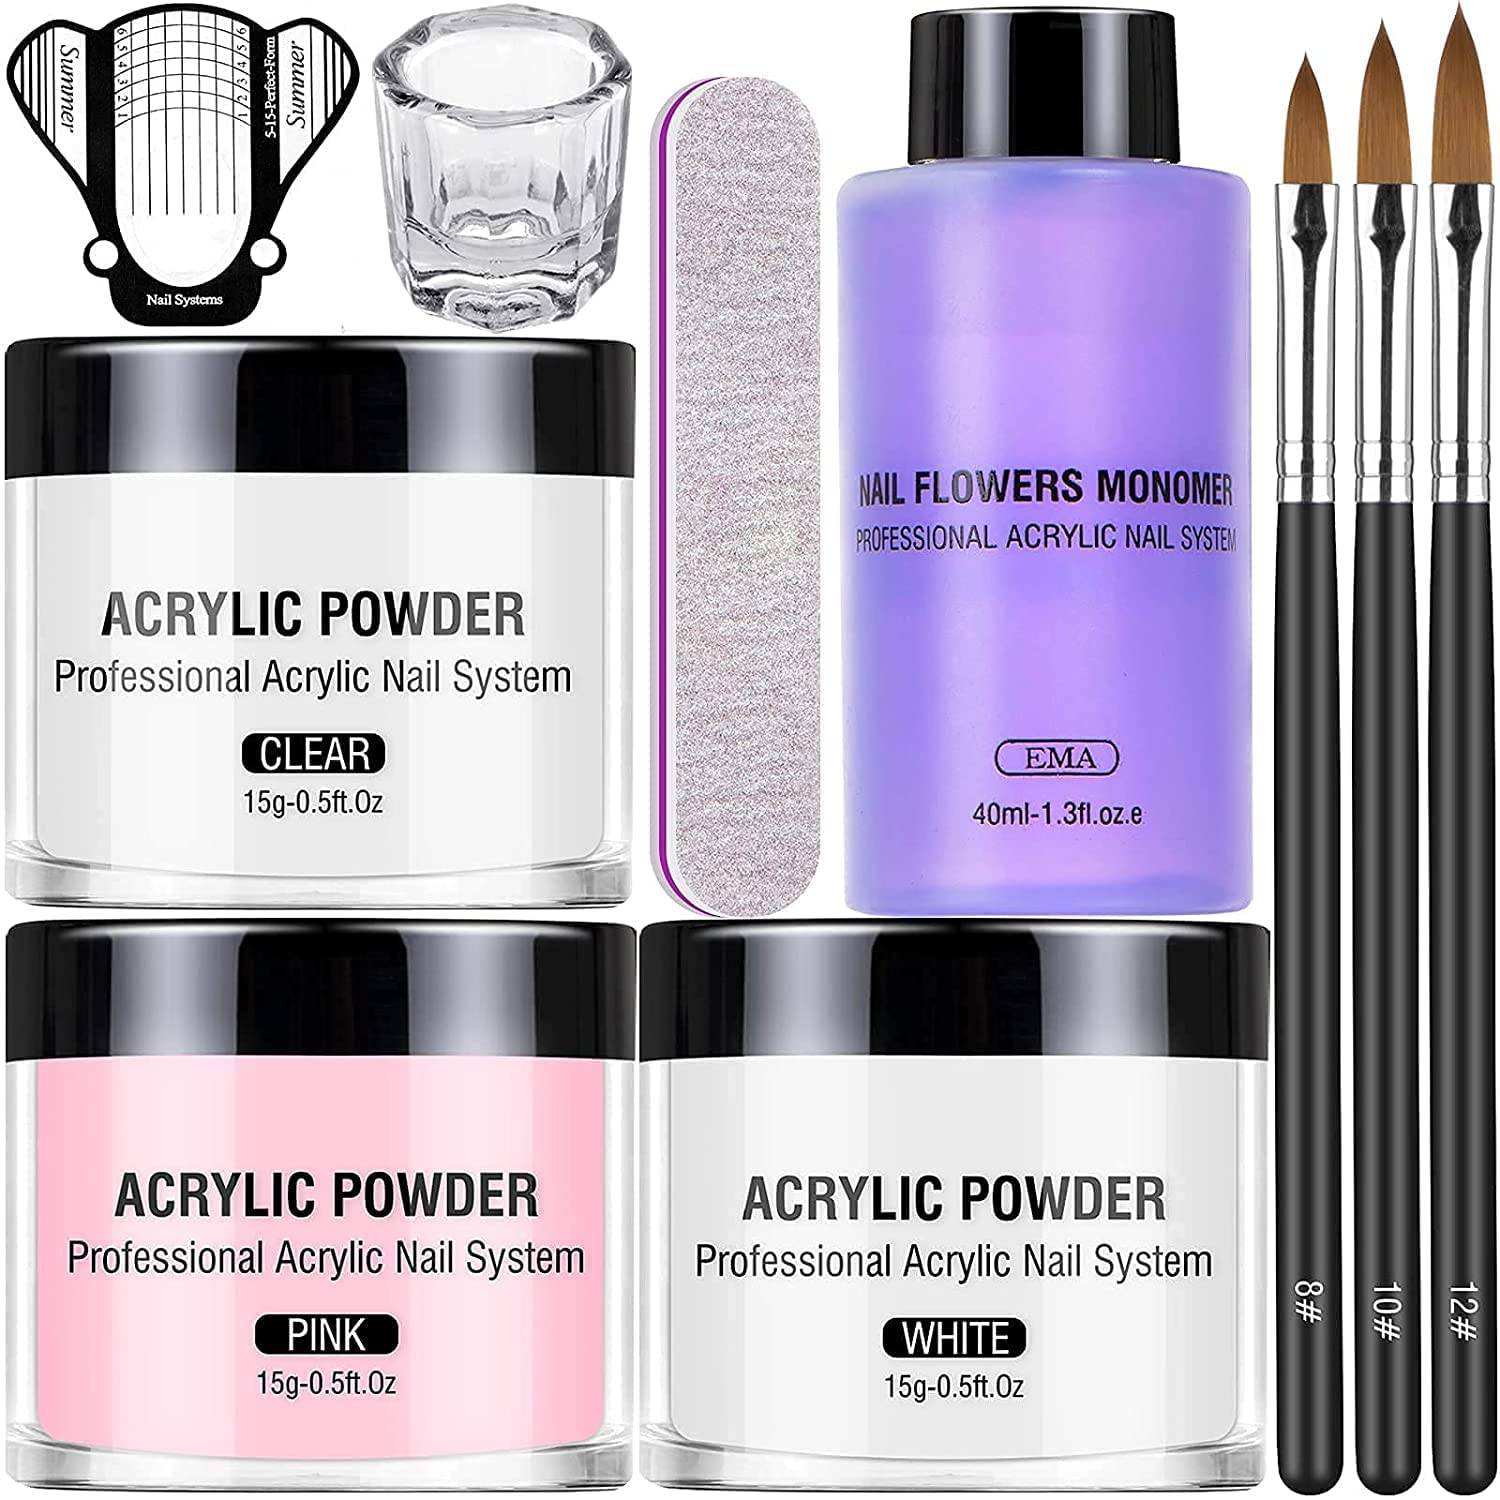 Buy SHILLS PROFESSIONAL Acrylic Powder Crystal Nail Art Tips Builder Acrylic  Nail Powder 30G Clear Online at Low Prices in India - Amazon.in